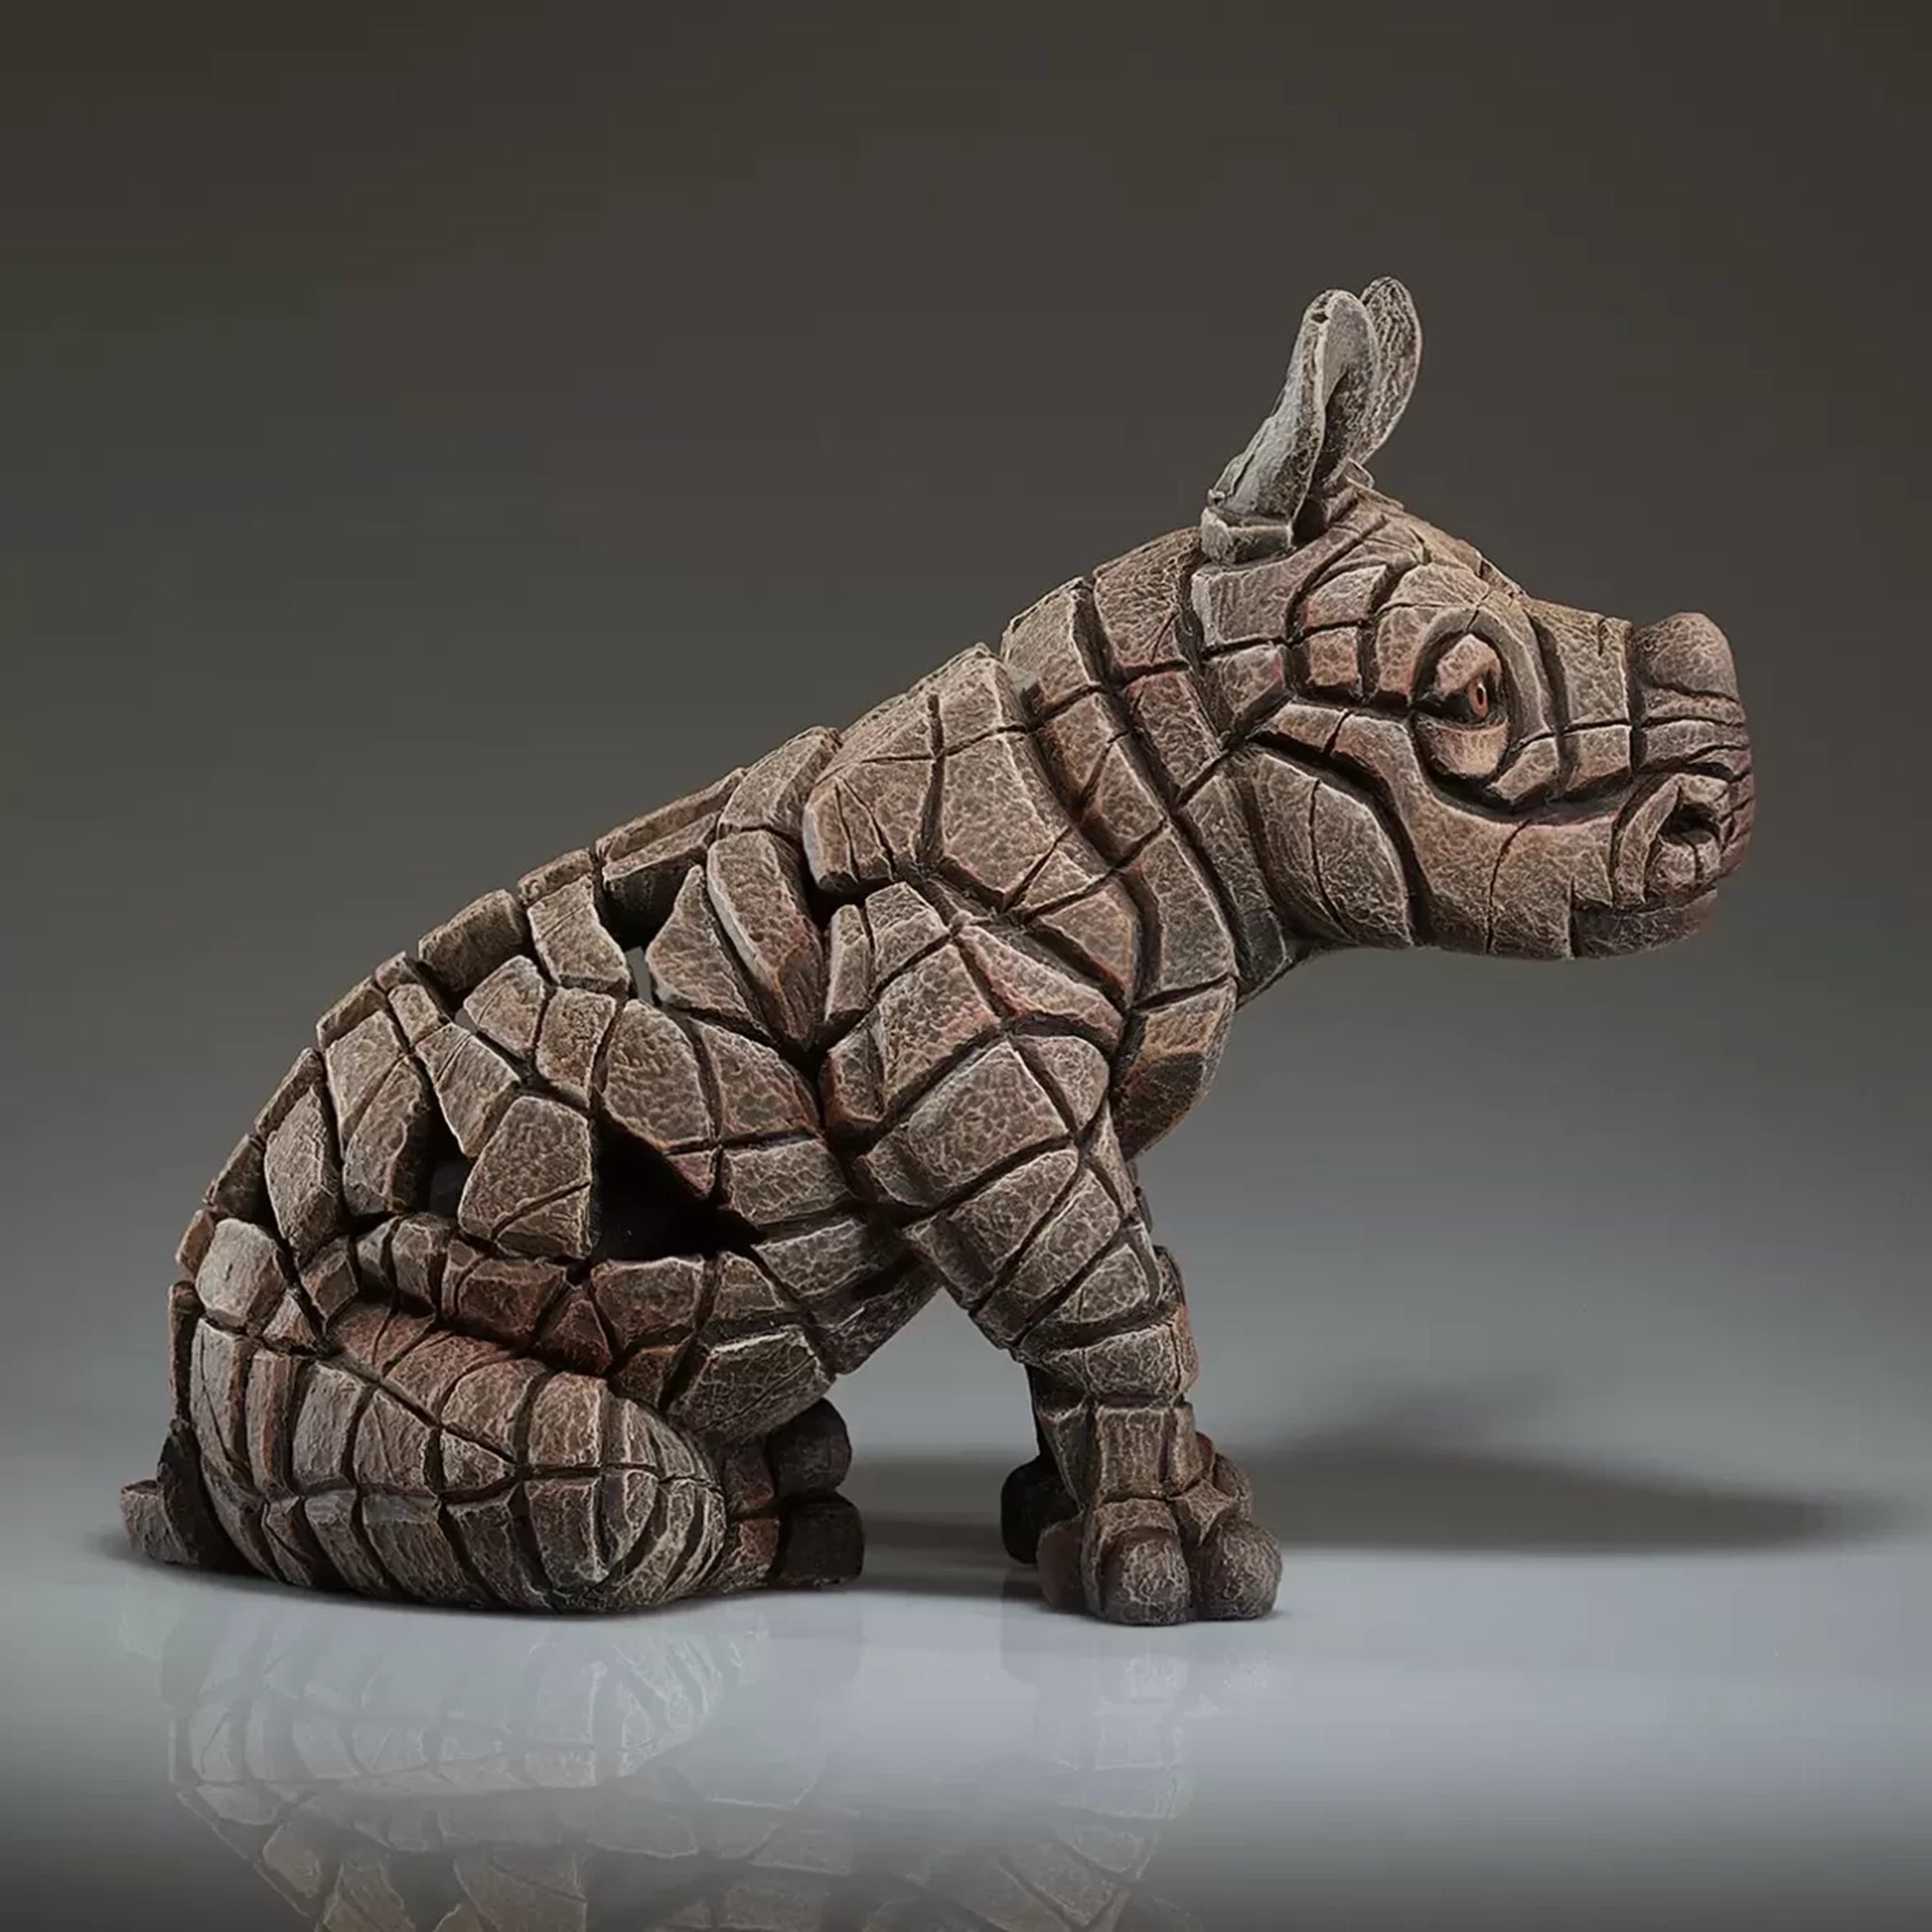 A textured and painted sitting rhino calf figure sculpture side view